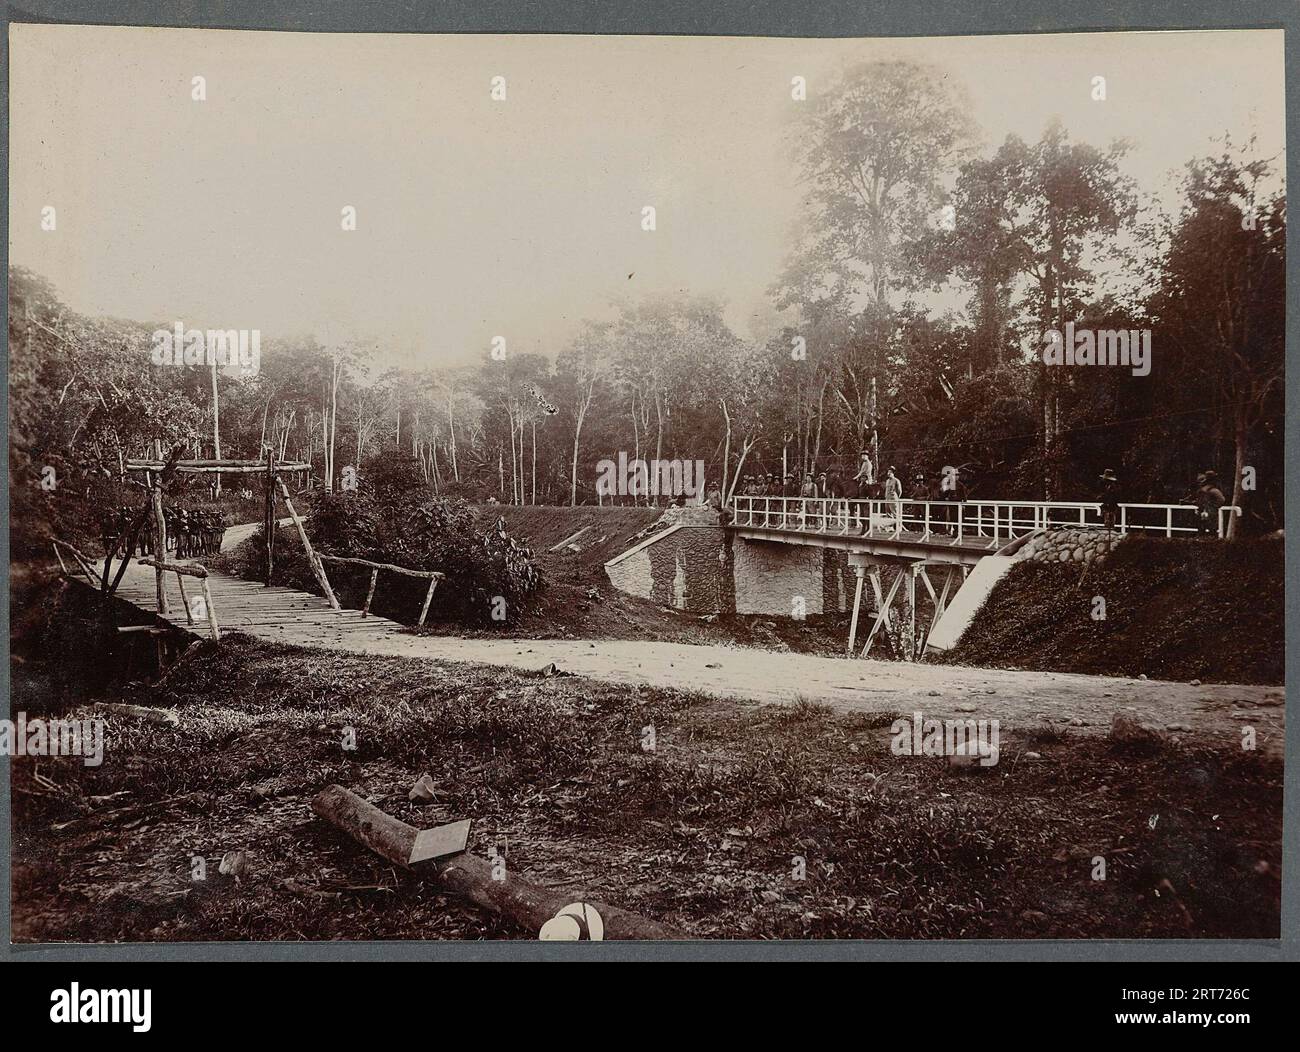 Colonial Dutch Empire in Indonesia, 1900, Bridge over the river Alue Teungoh, anonymous, 1903 - 1913 Stock Photo